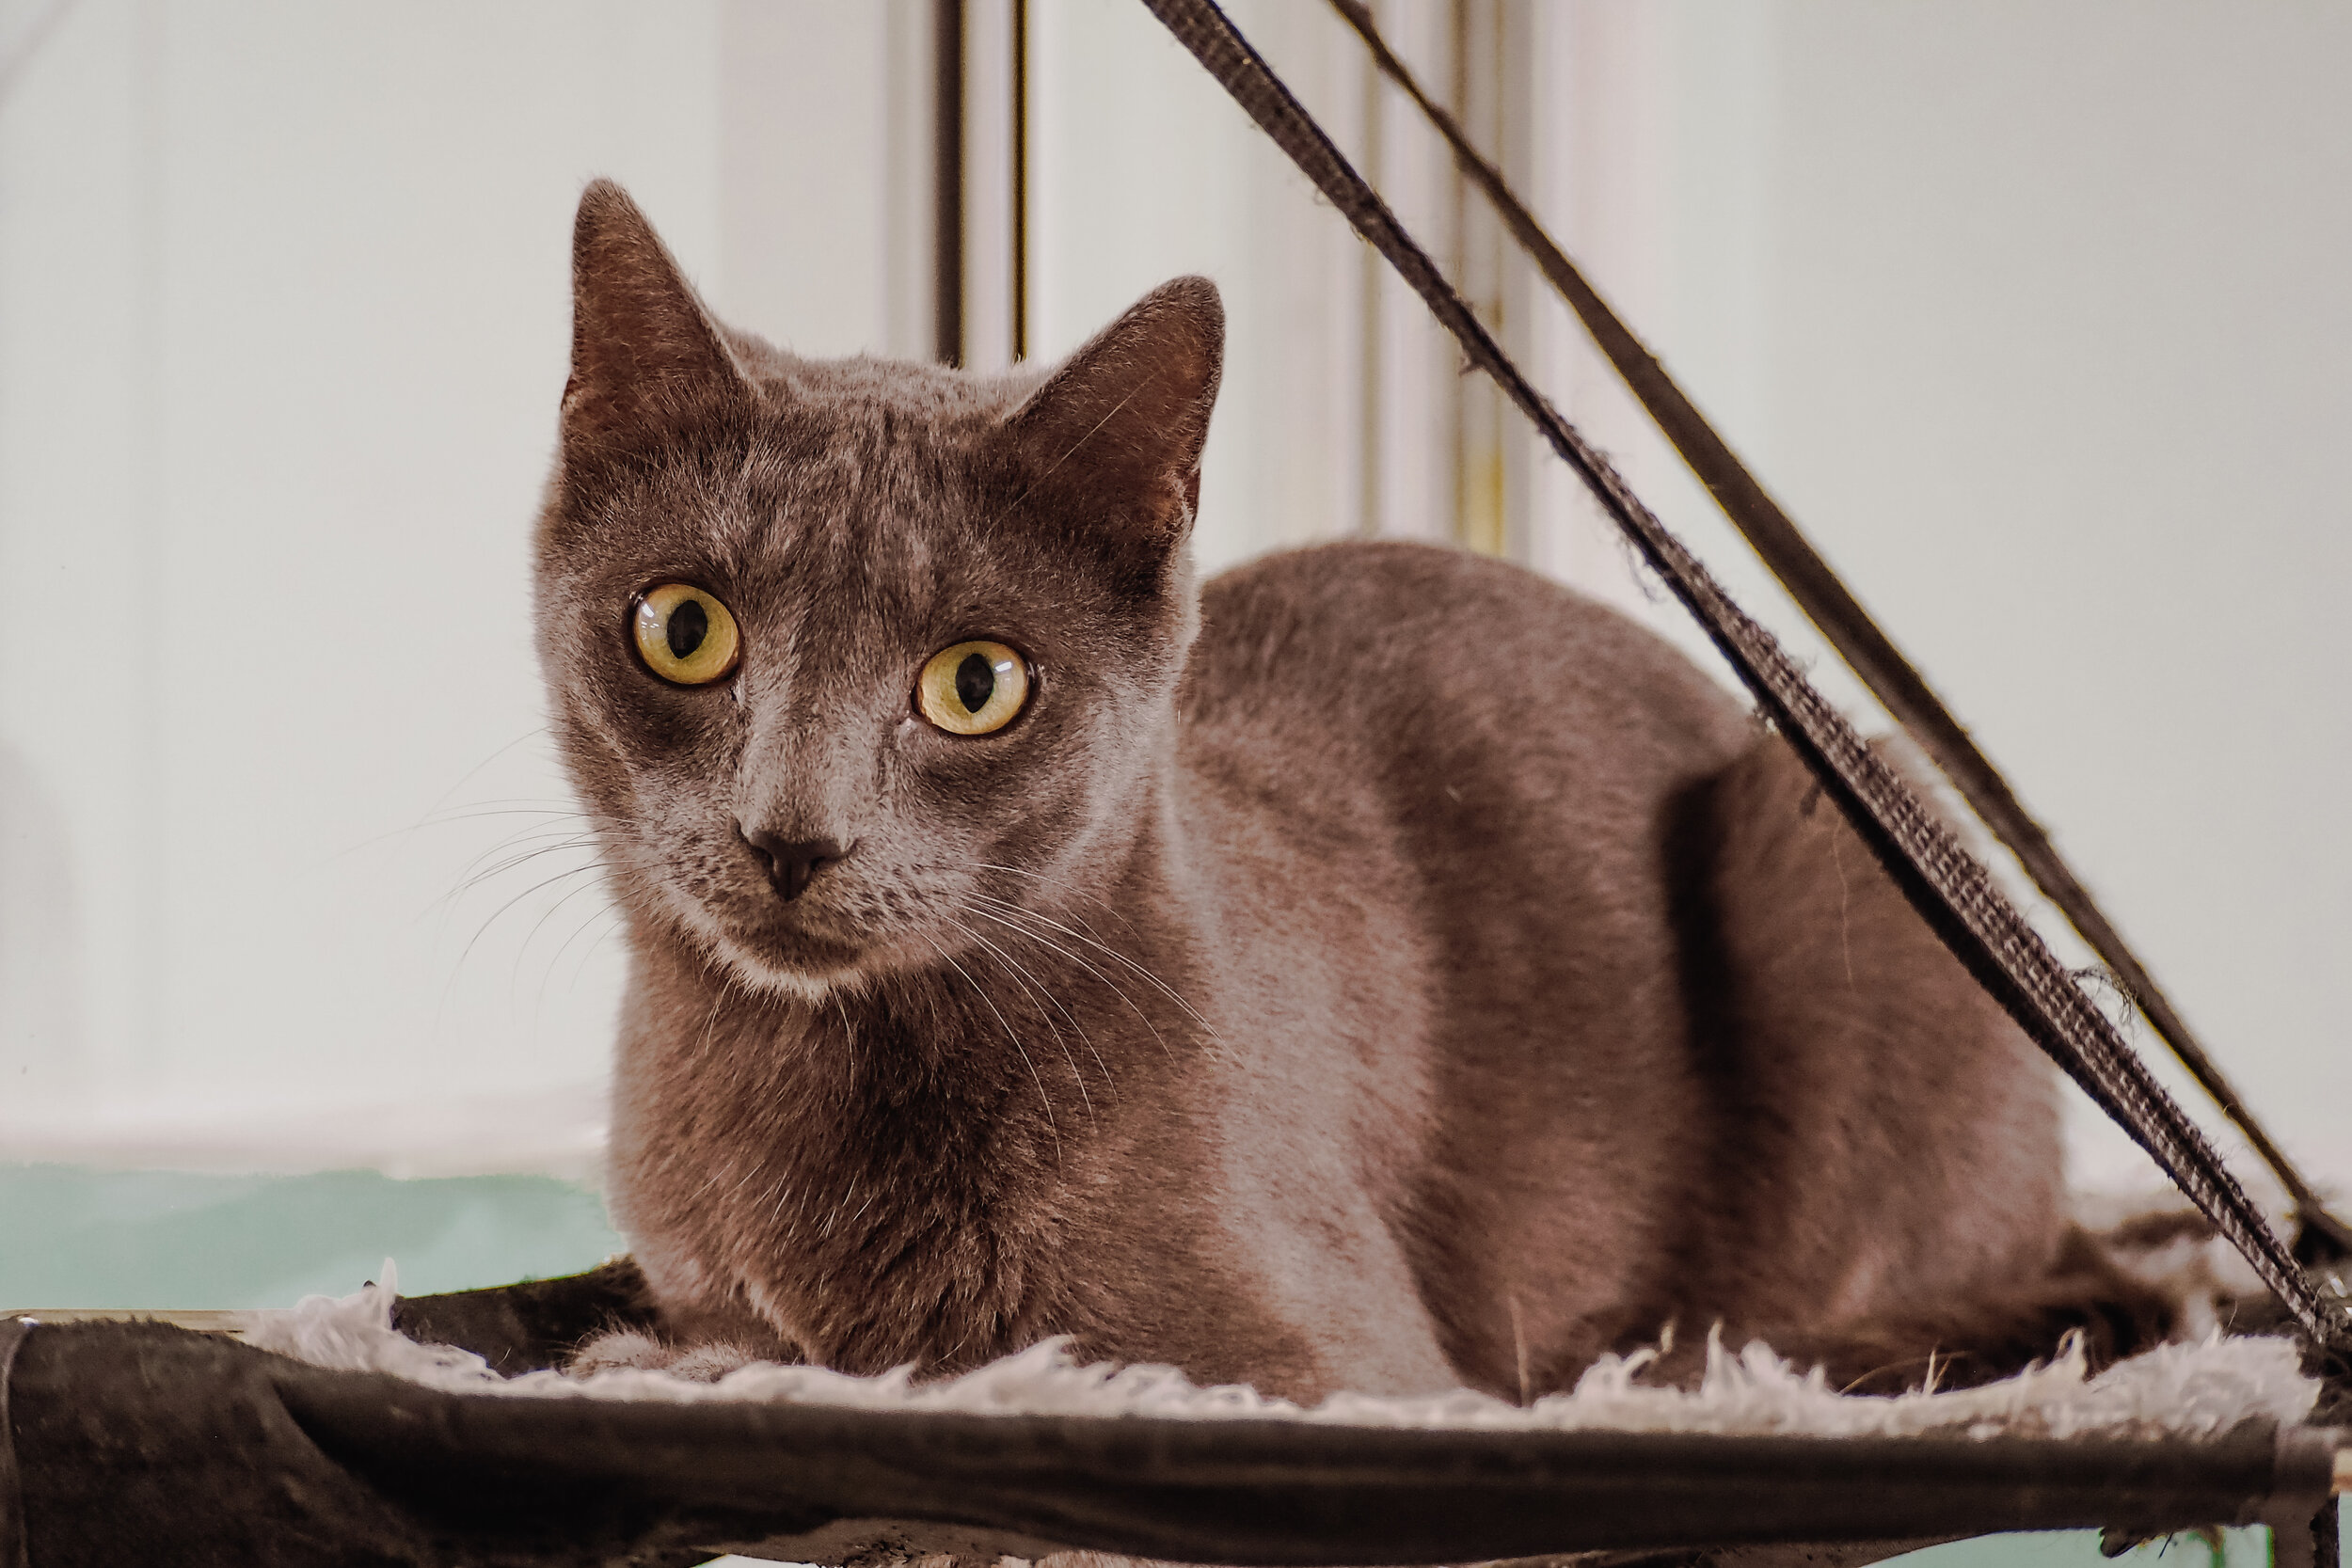  Check out our adoptable cats!    Learn More   